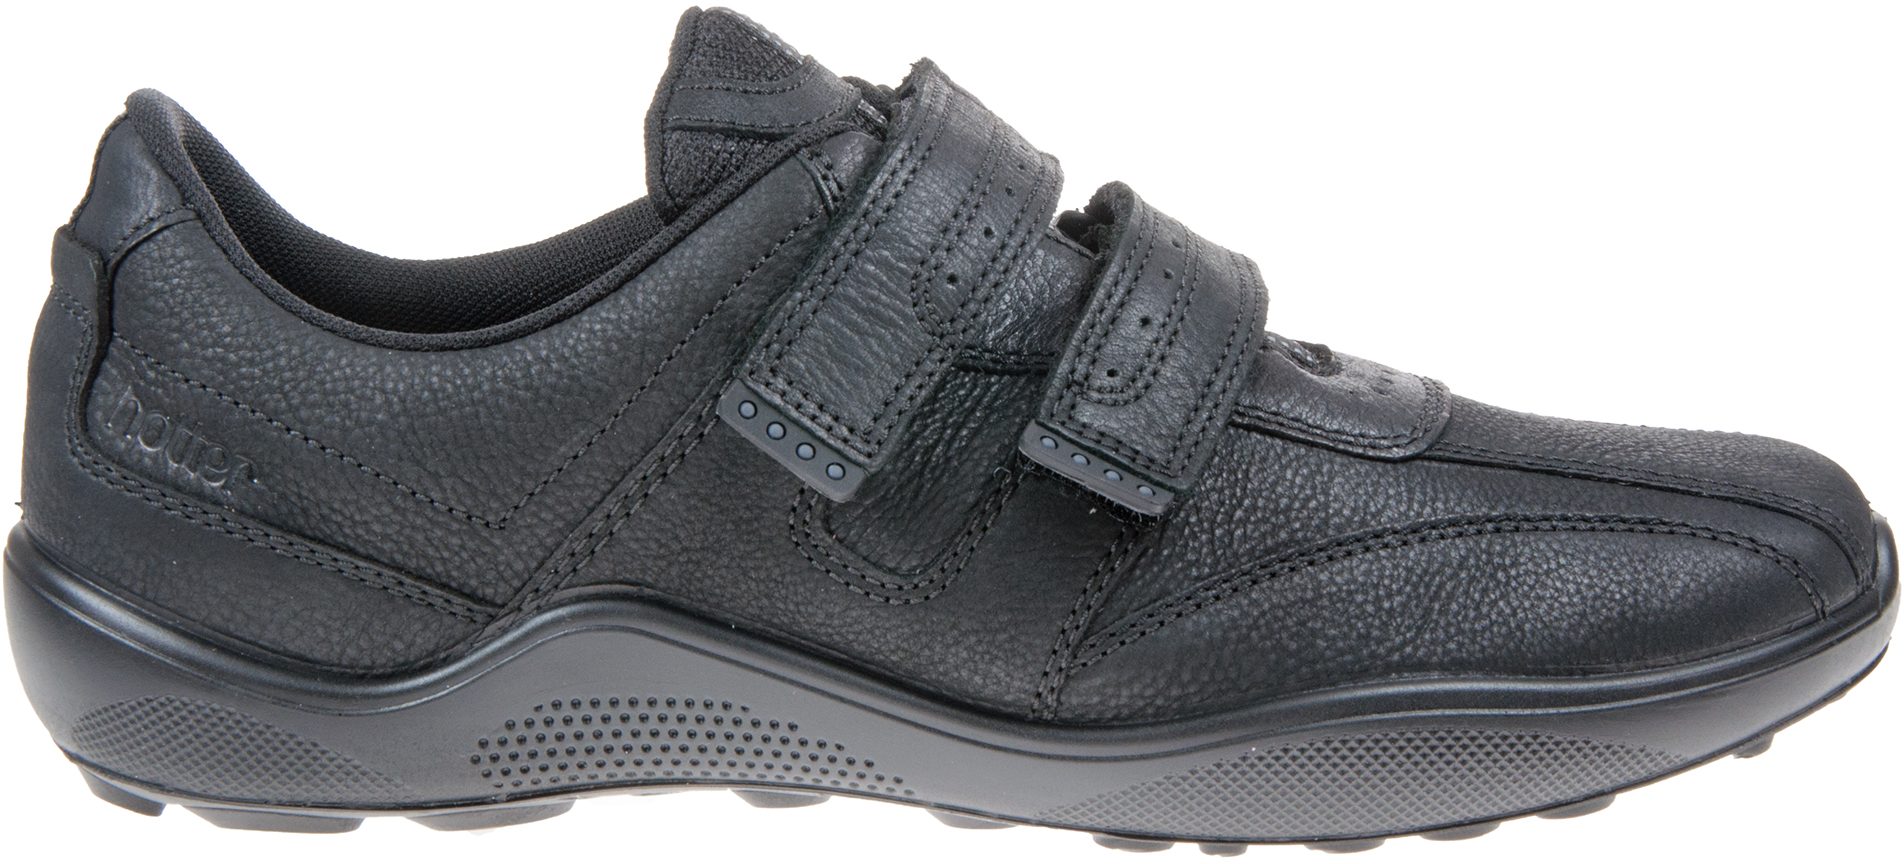 Hotter Energise Black 2 - Casual Shoes - Humphries Shoes